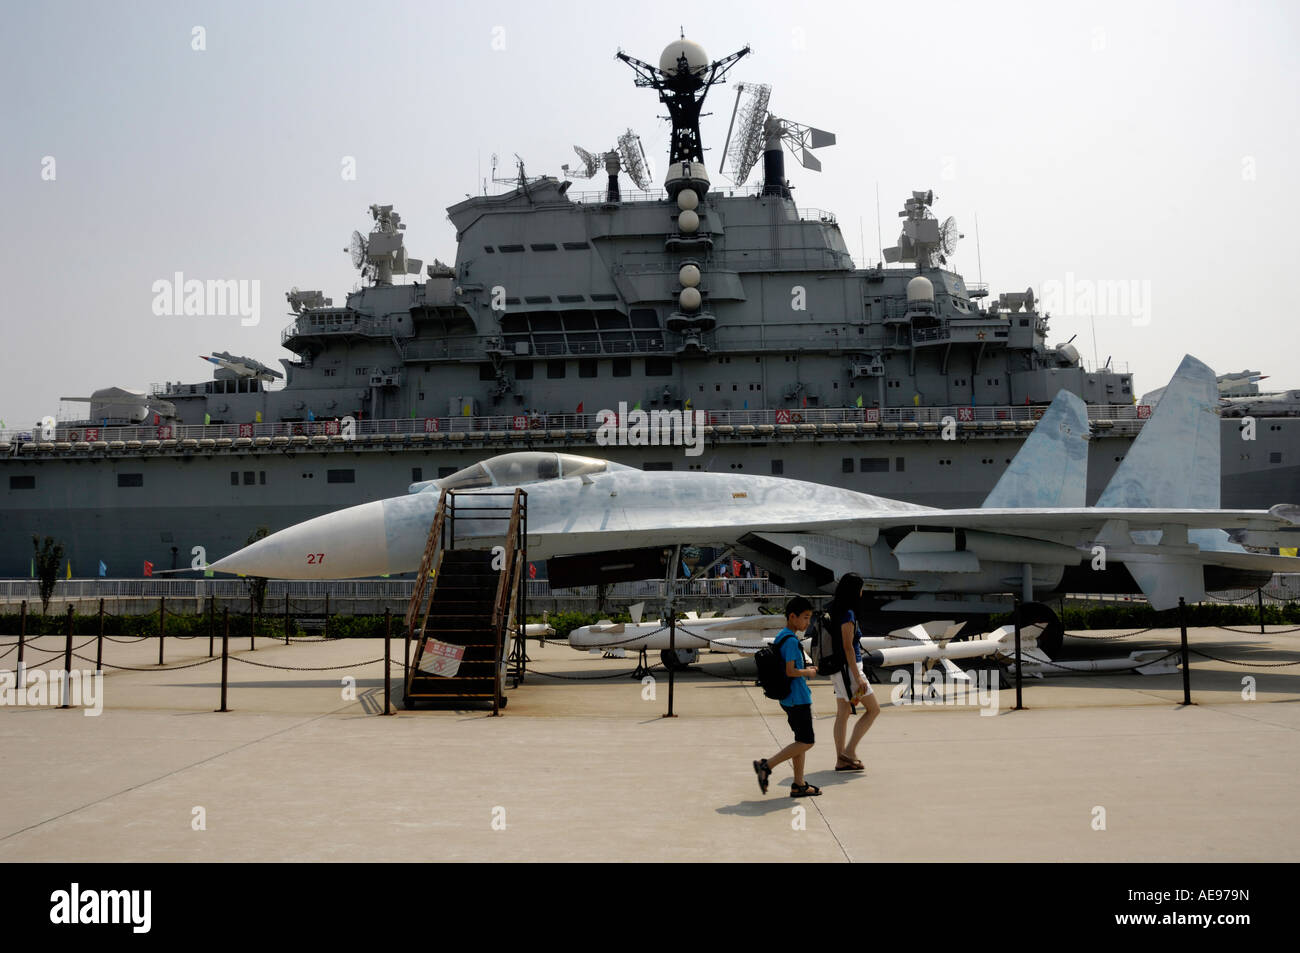 Soviet aircraft carrier Kiev and Su-27 in the military theme park in Tianjin China 19 Aug 2007 Stock Photo